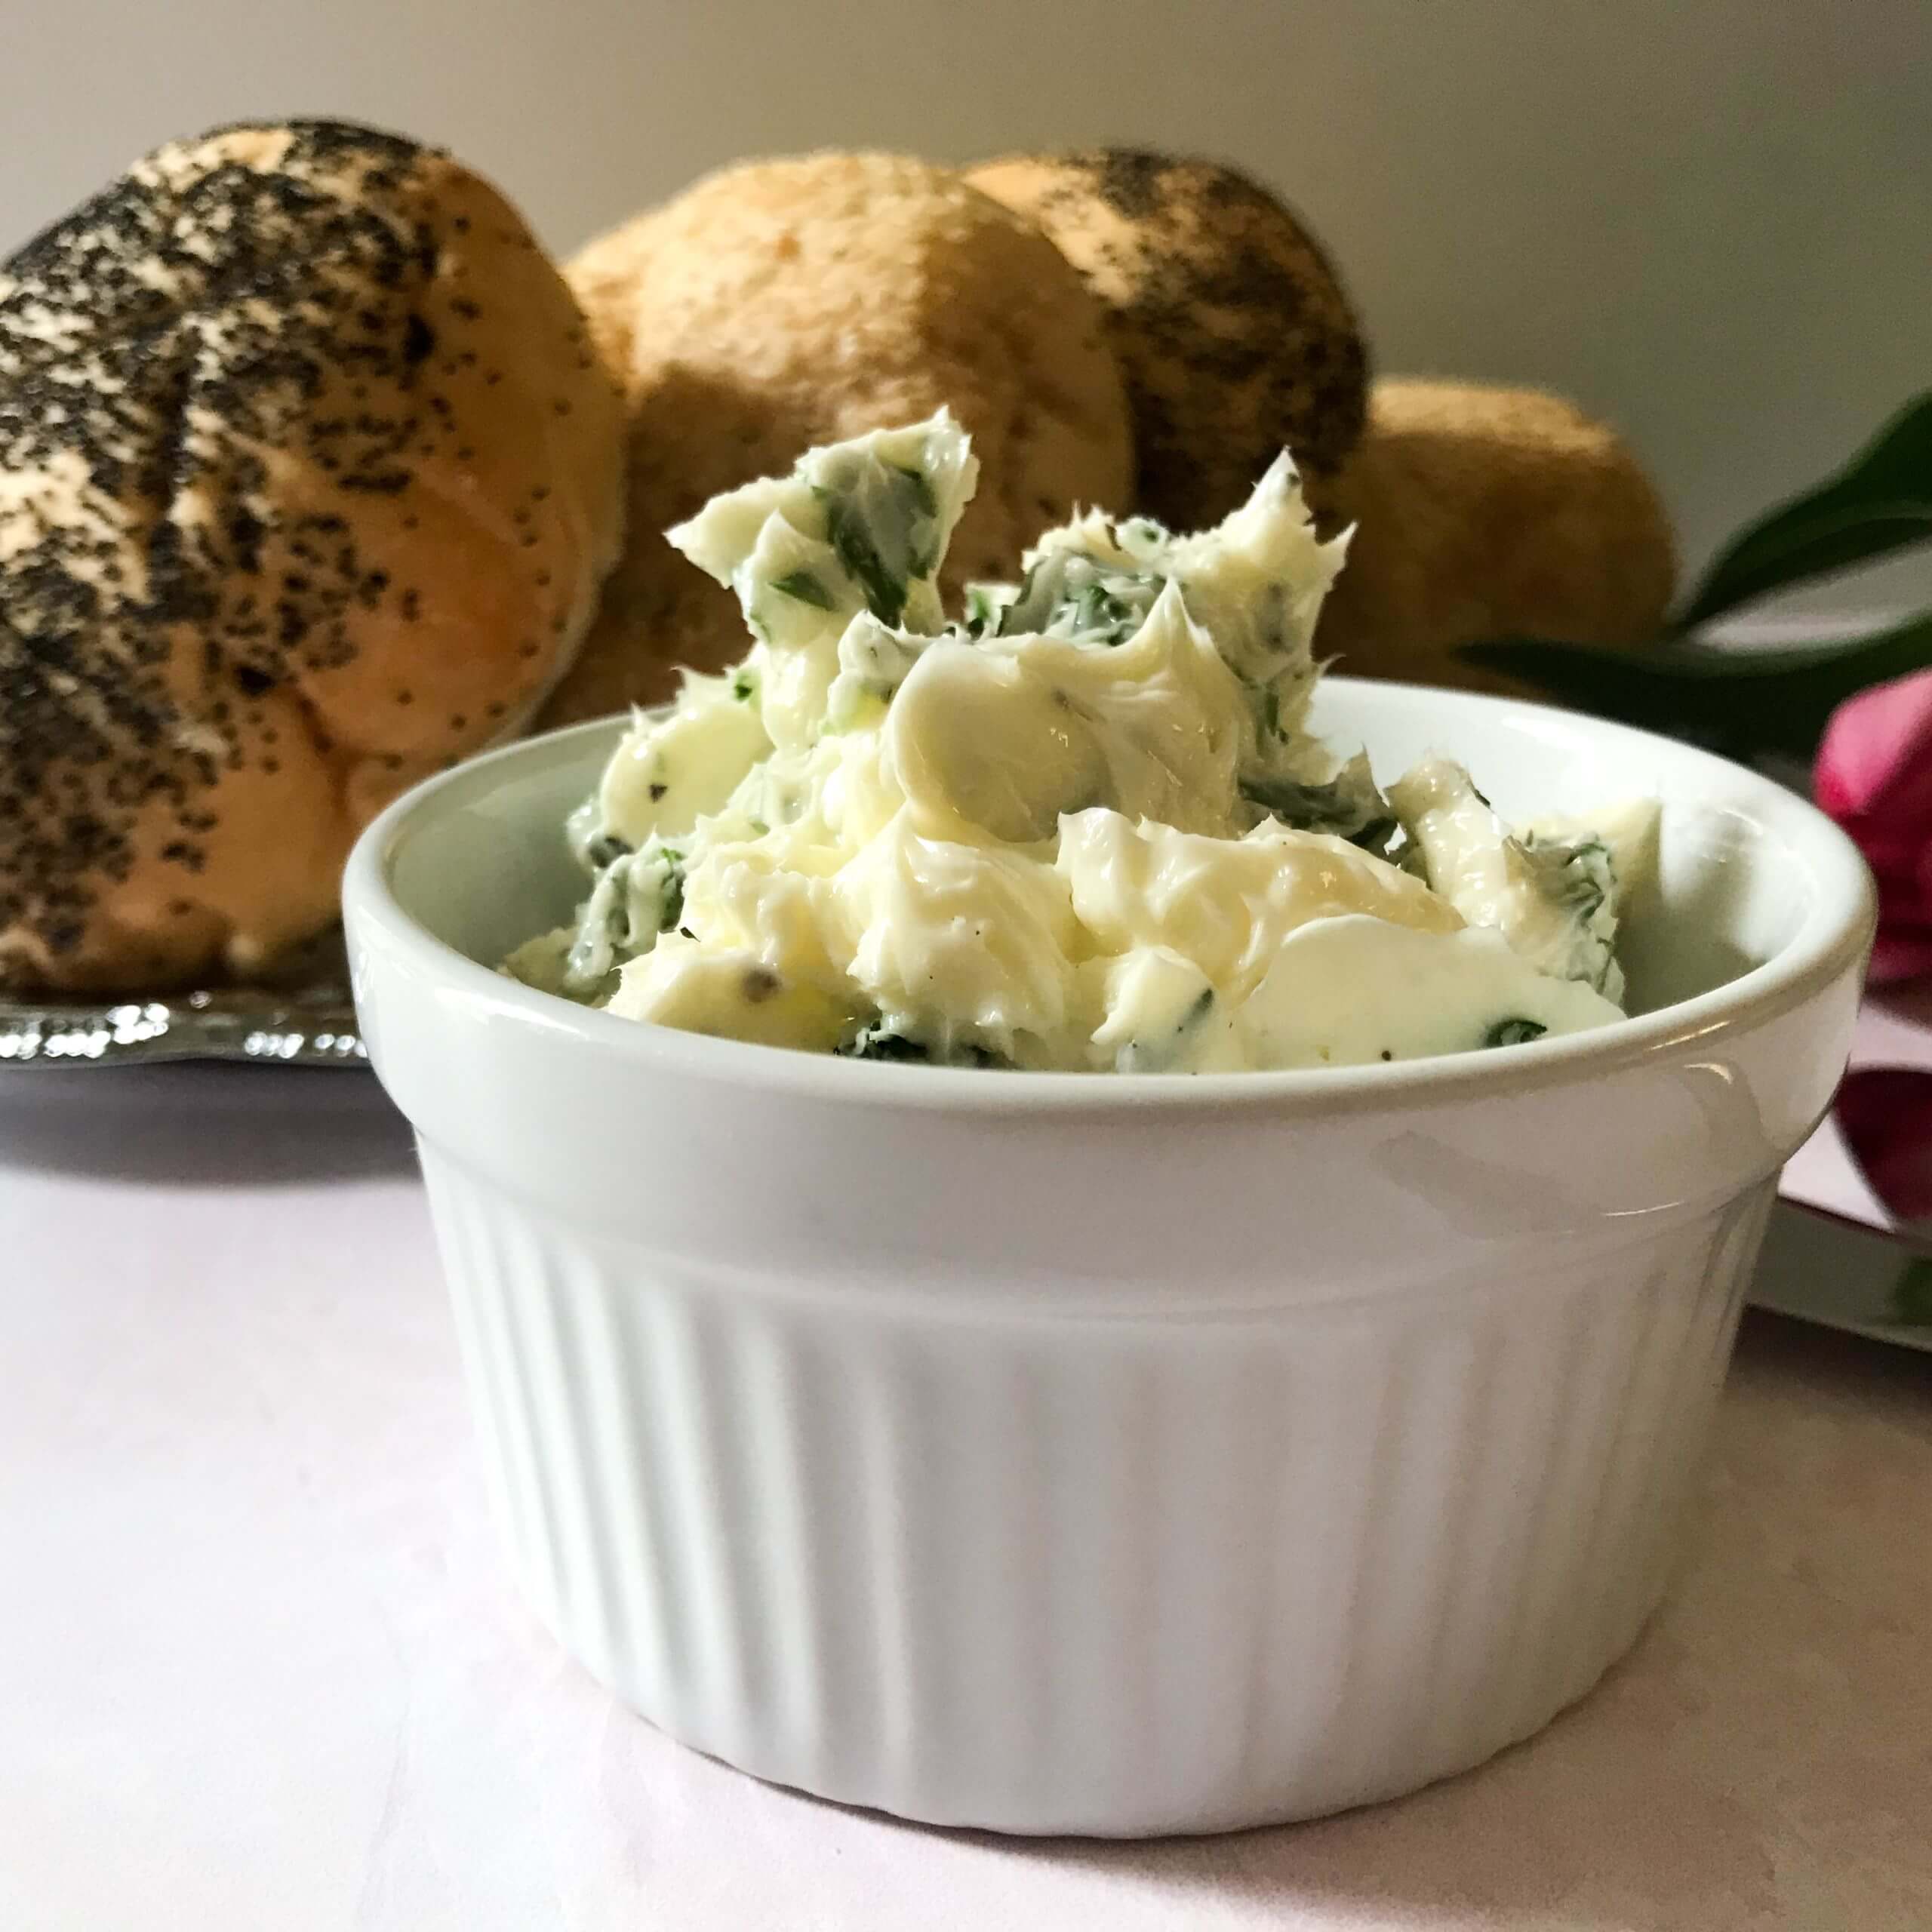 Kaiser Rolls and Herbed Butter | My Curated Tastes